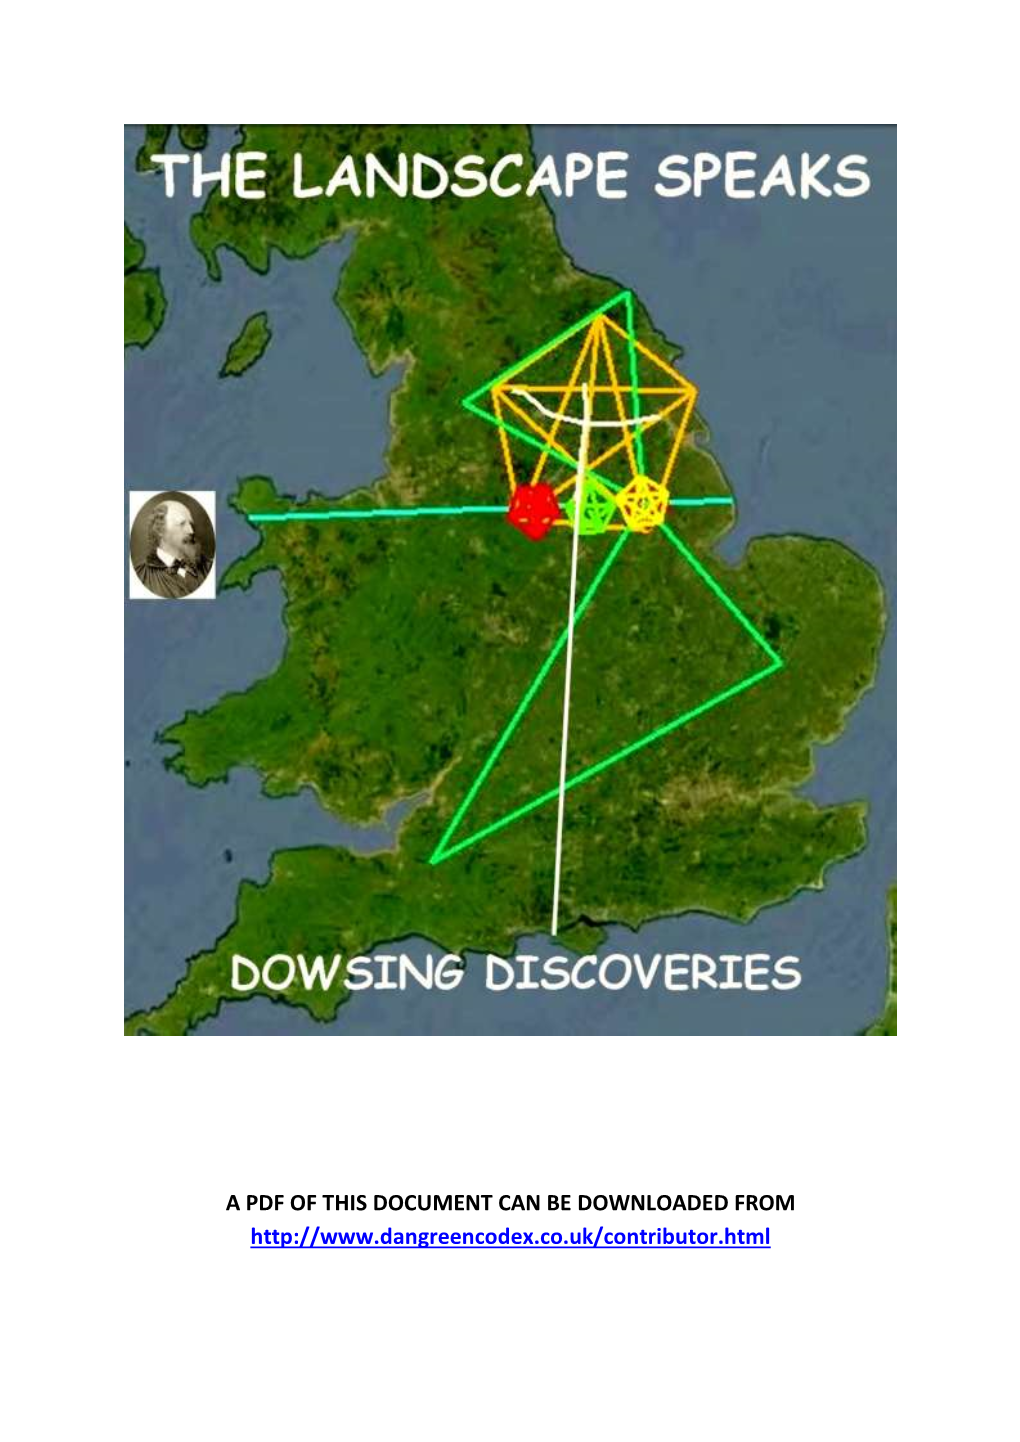 The Landscape Speaks – Dowsing Discoveries